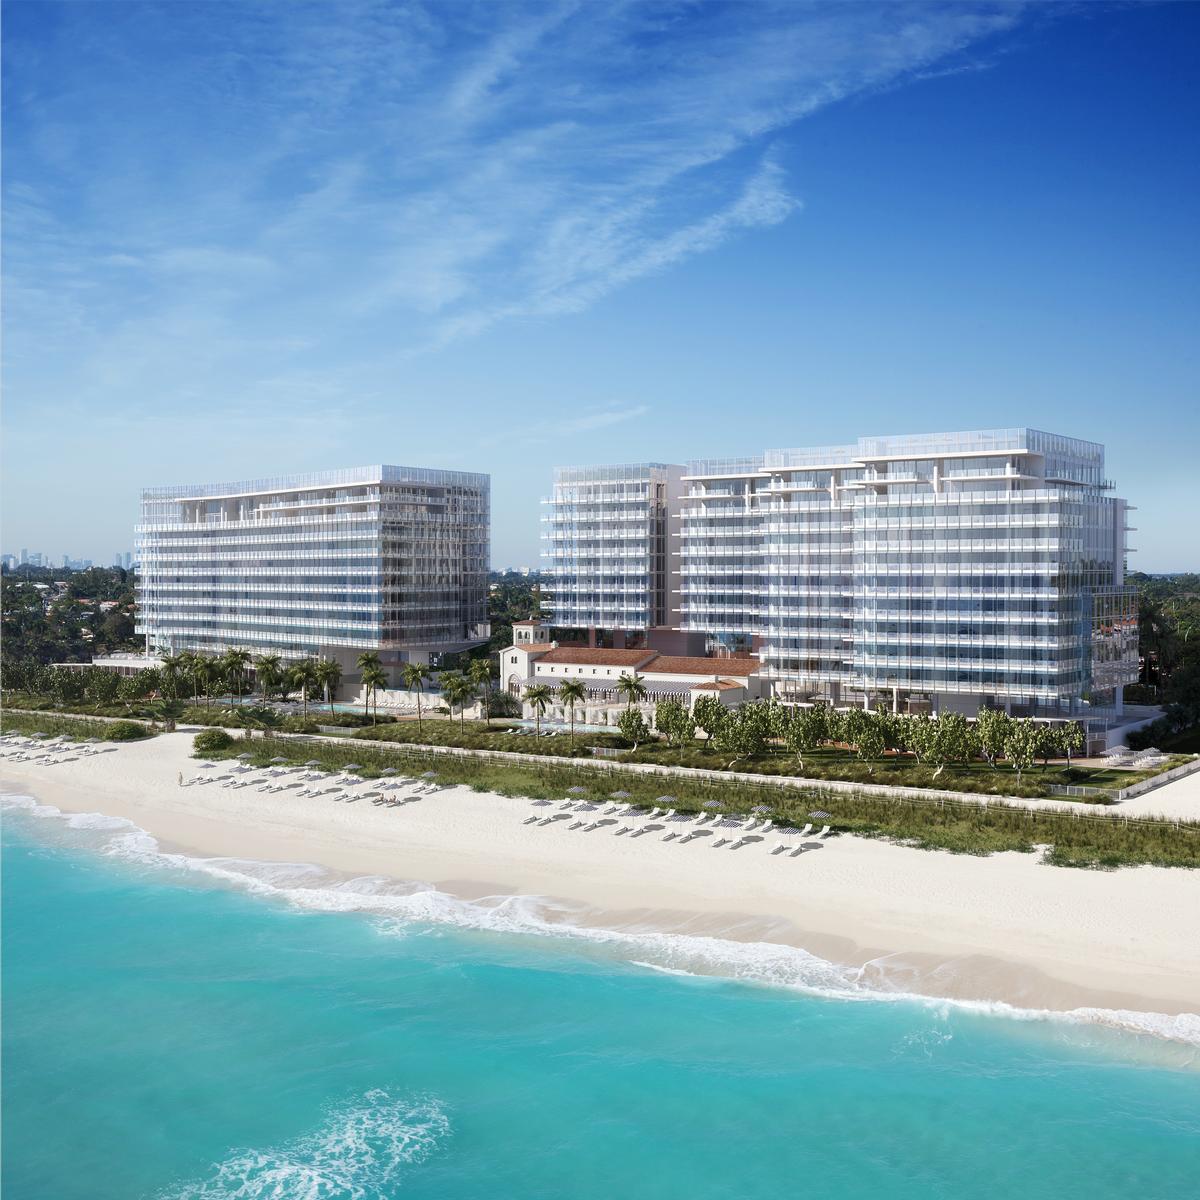 Meier is currently working on the redevelopment of the historic private members' Surf Club in Miami into the Surf Club Four Seasons Hotel and Residences / DBOX